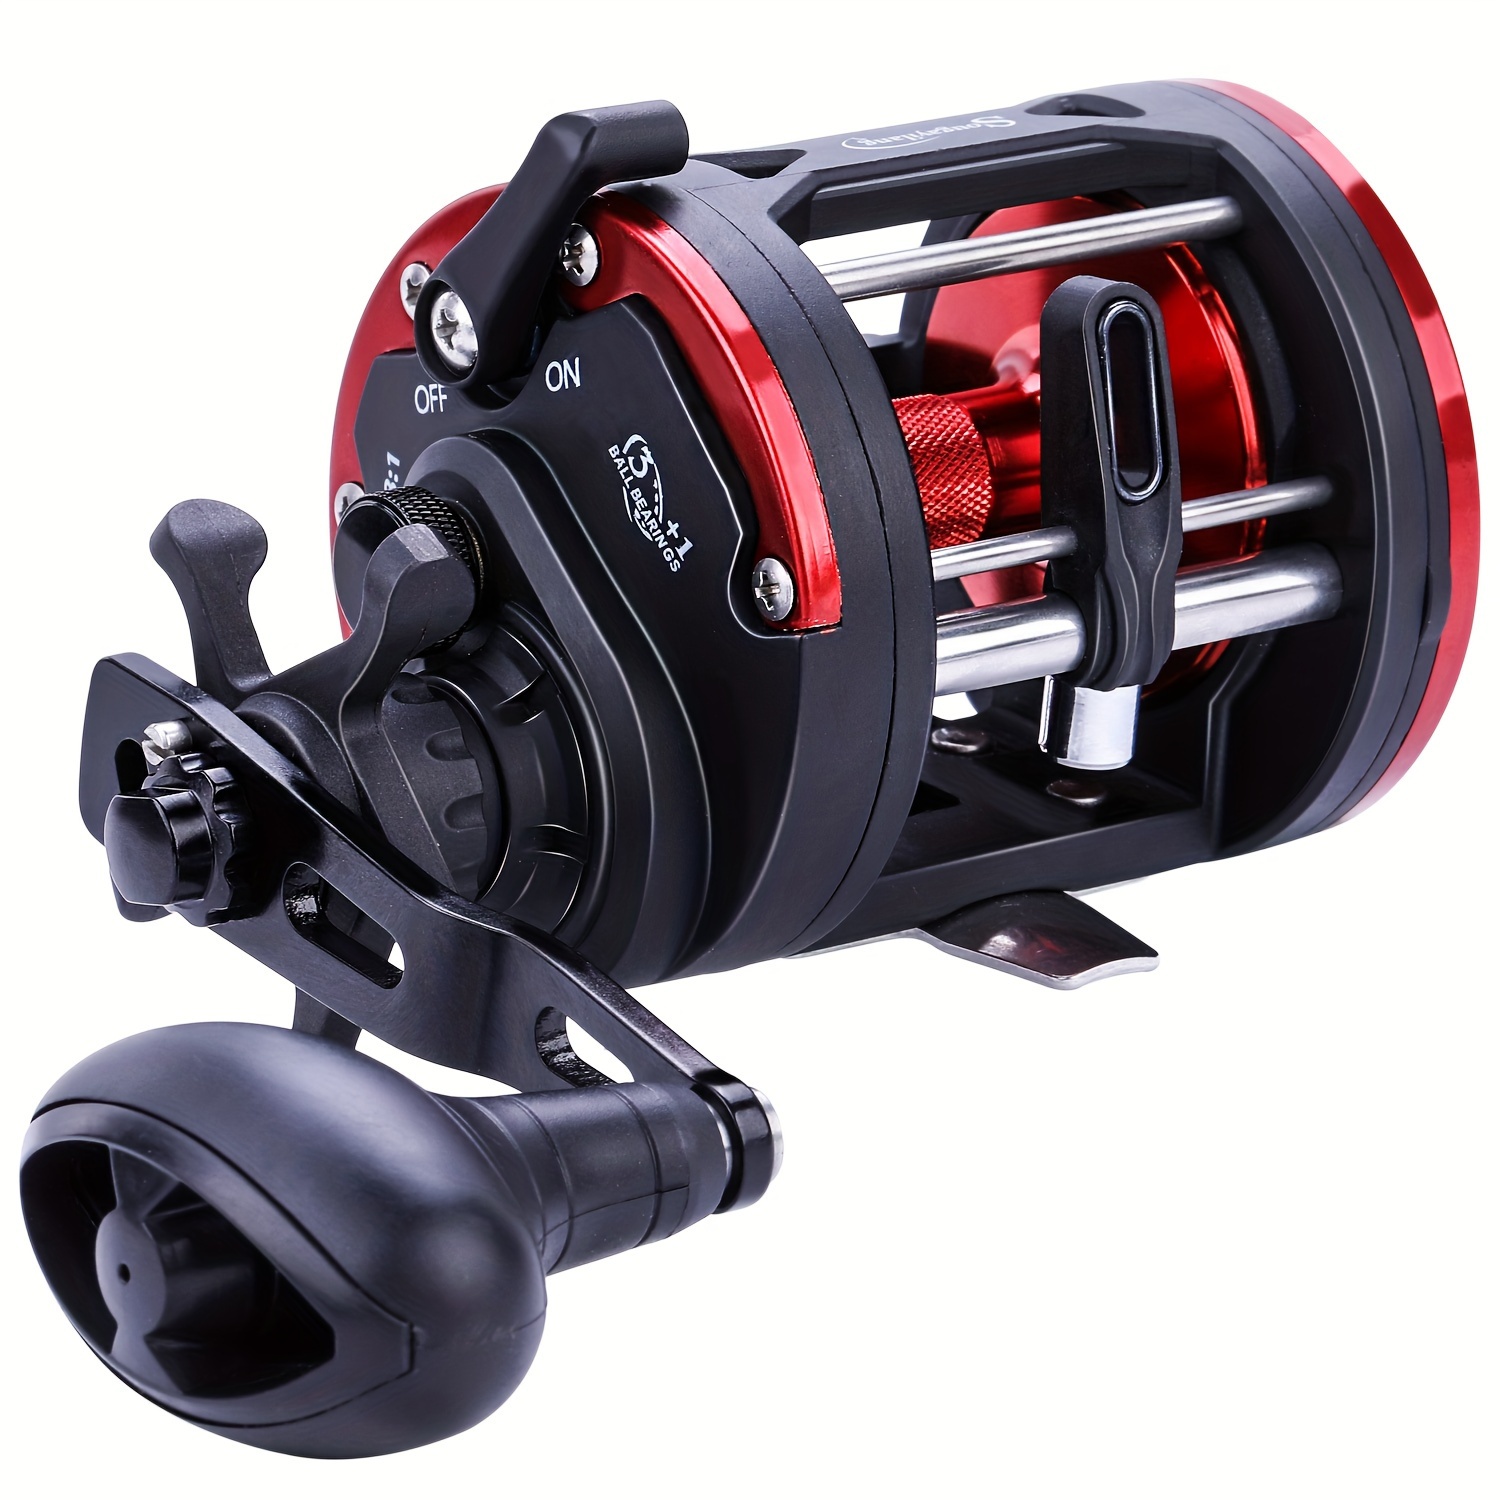 

Sougayilang Trolling Reel Level Wind Conventional Reel Graphite Body Fishing Reel, Durable Stainless-steel, Large Line Capacity